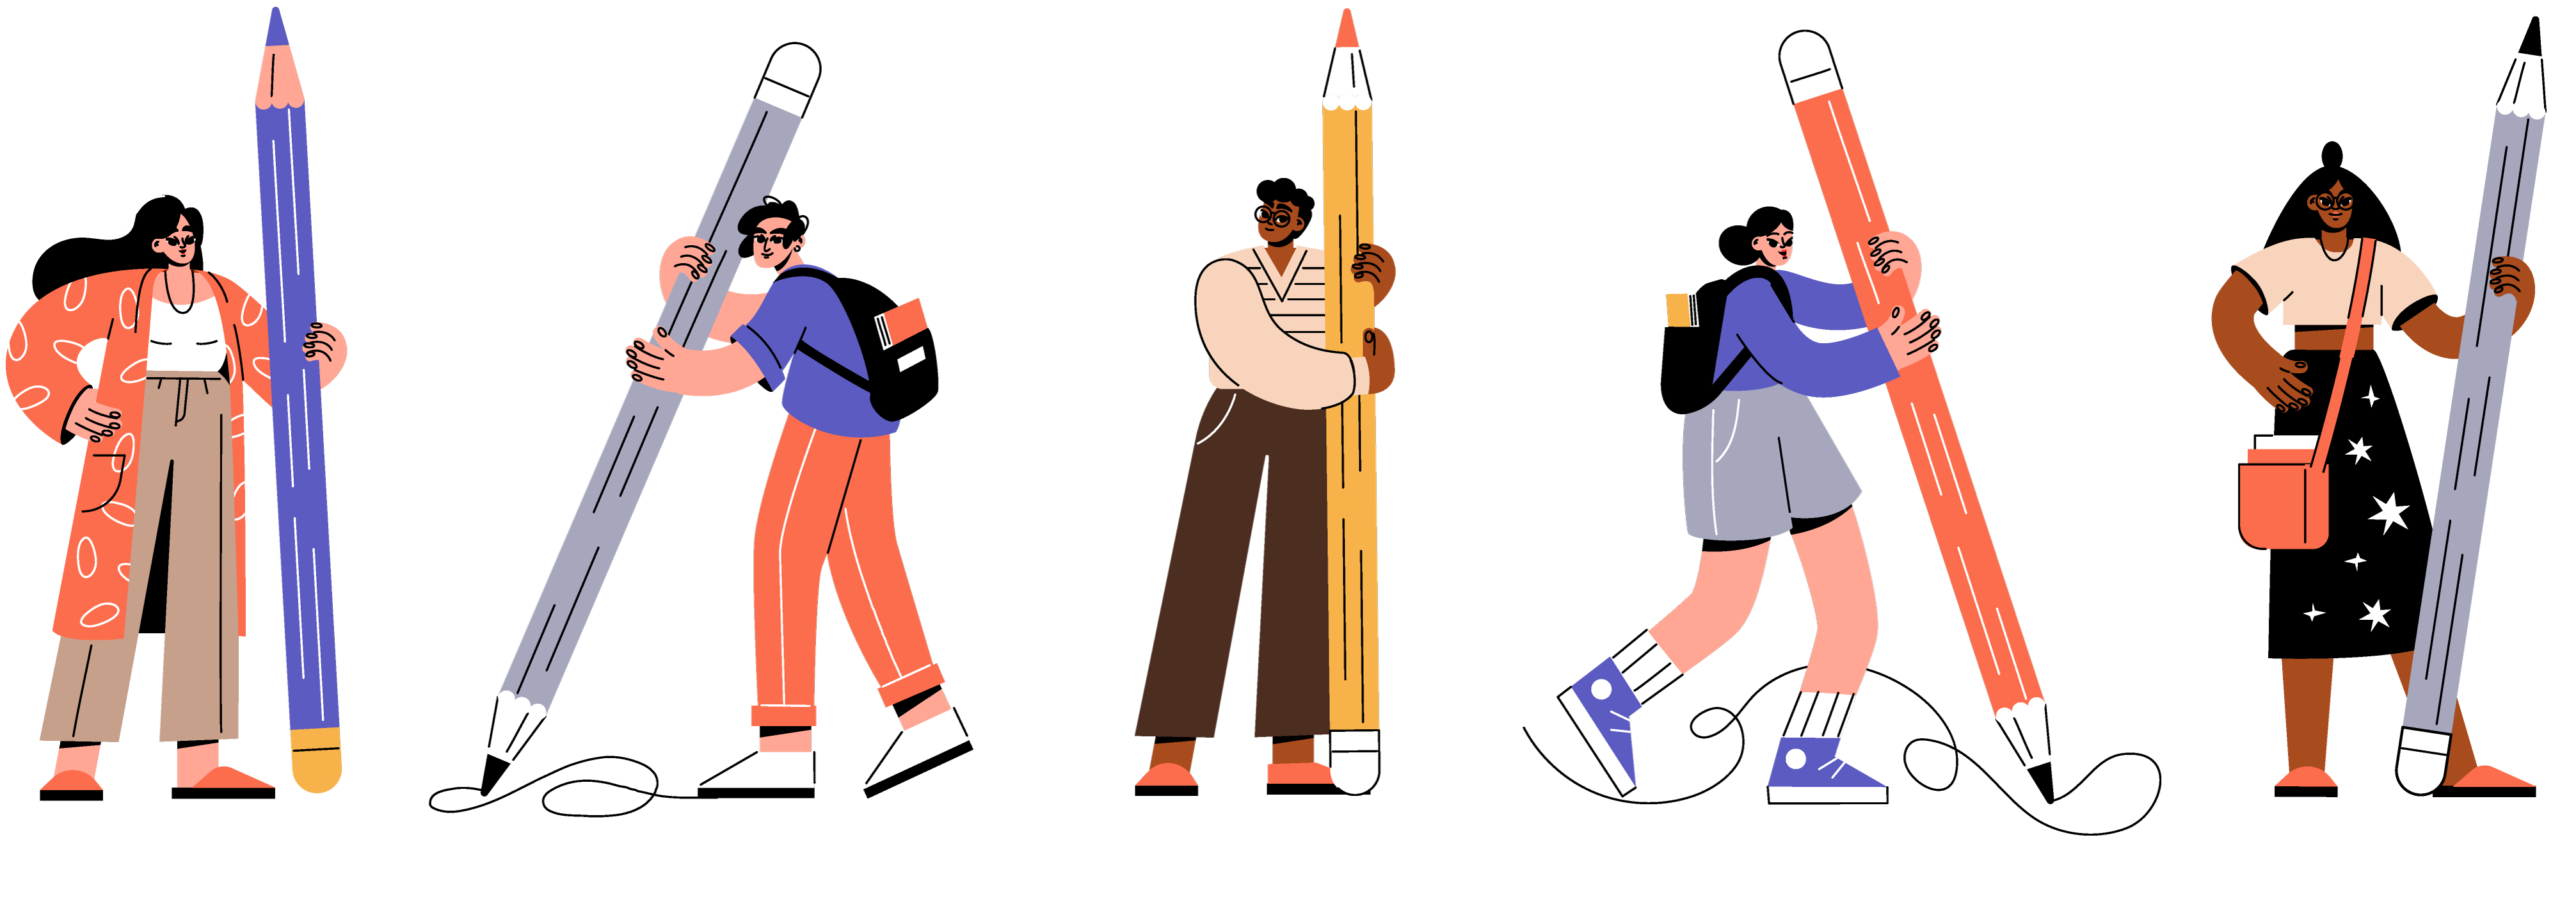 illustration of students with large pencils